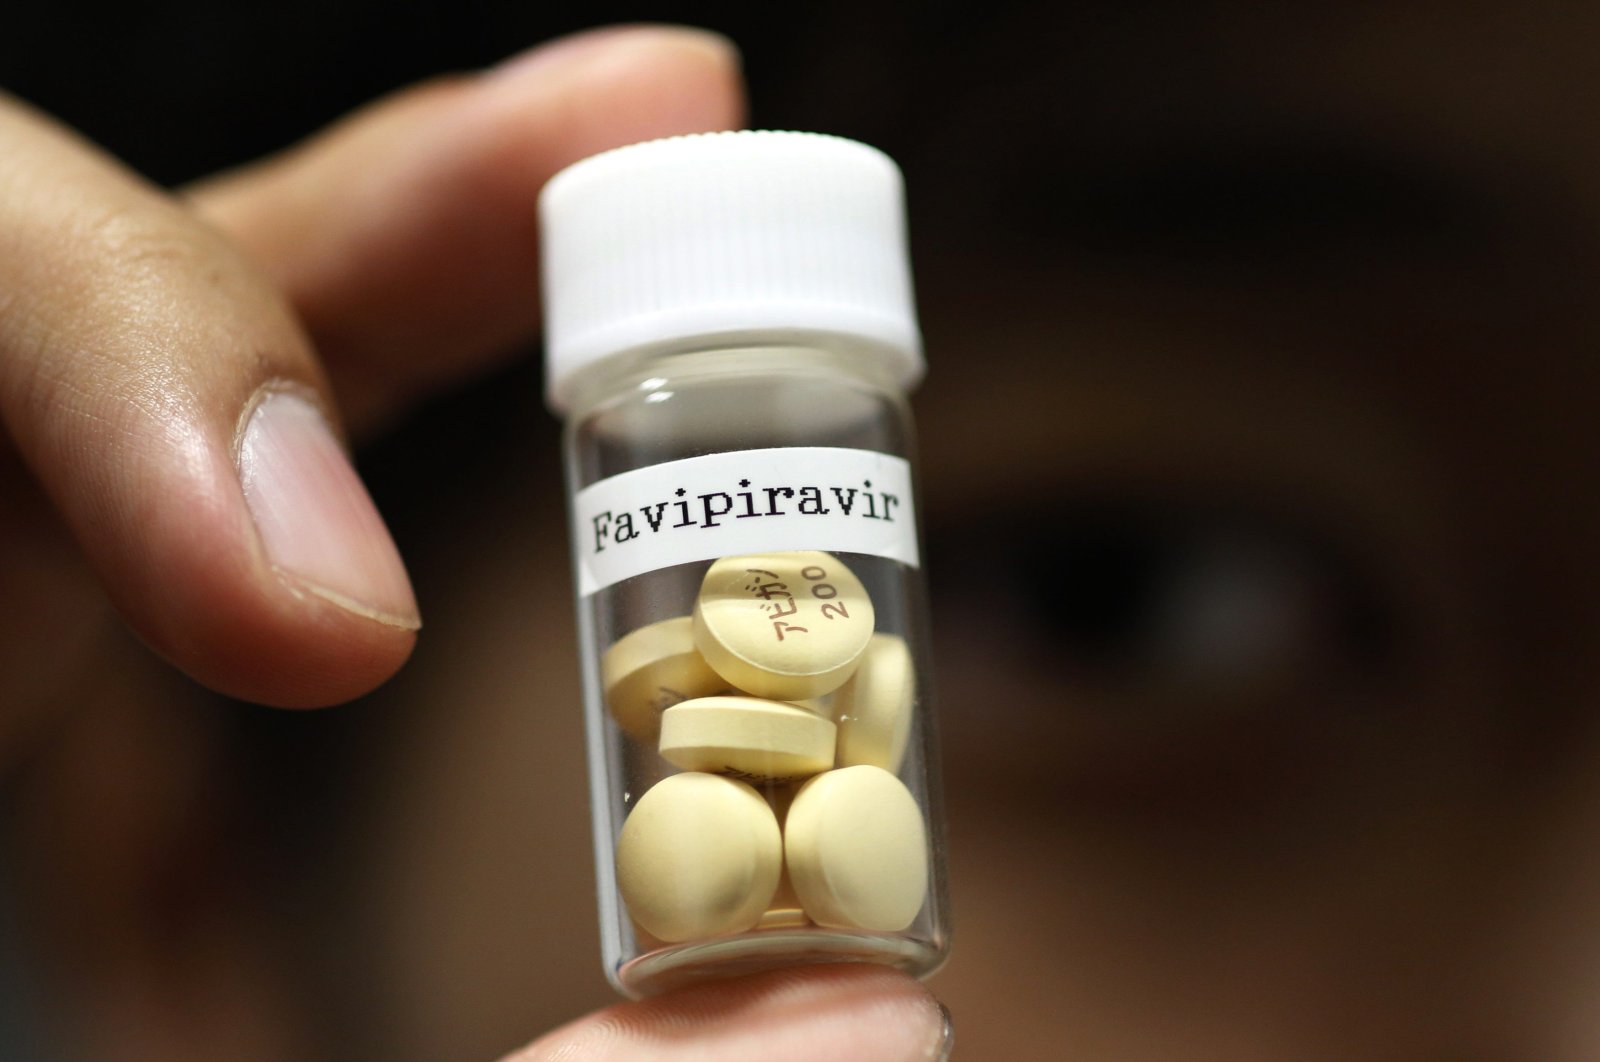 Avigan tablets (generic name: Favipiravir), a drug approved as an anti-influenza drug in Japan and developed by Toyama Chemical Co., a subsidiary of Fujifilm Holdings Co. are displayed in Tokyo, Oct. 22, 2014. (Reuters Photo)